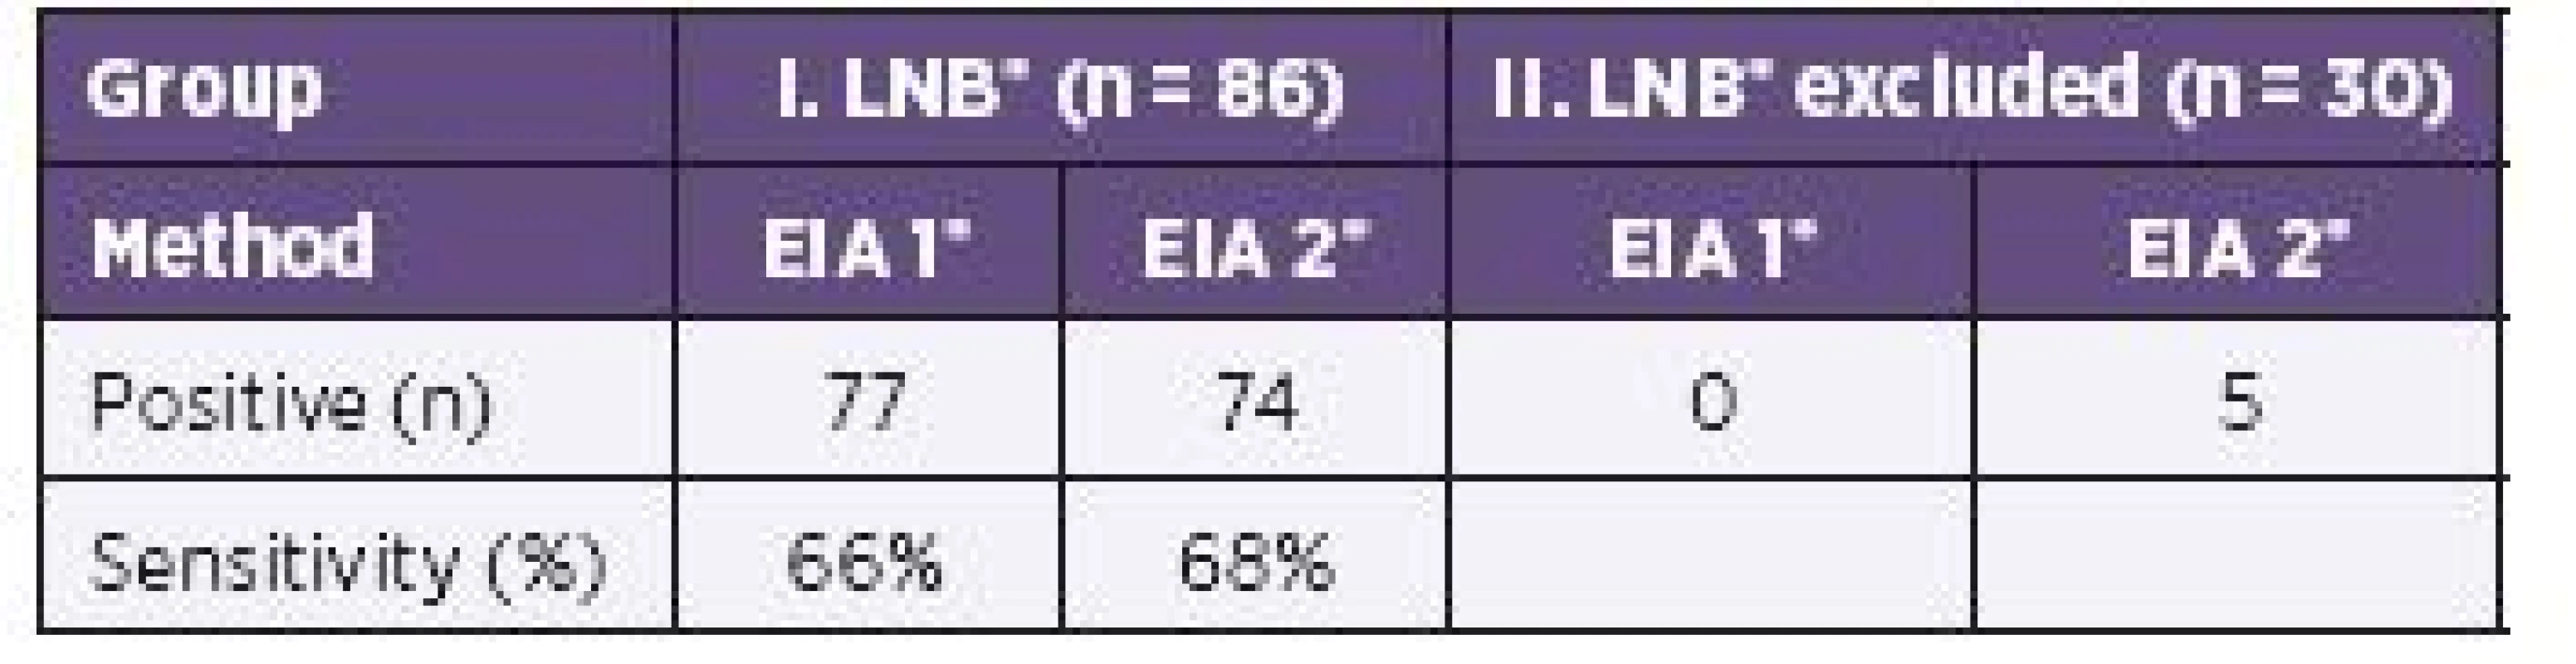 Comparison of IgM/IgG Antibody Indices Calculated from Two EIA Tests in 116 Children. Sensitivity Calculations are Based on LNB Group of Children (n = 86) and Excluded LNB (n = 30). Specificity is 100% for Both EIA Methods. No Sample of Control Group had Positive Antibody Index. Specificity Calculation is Based on Controls (n = 66).